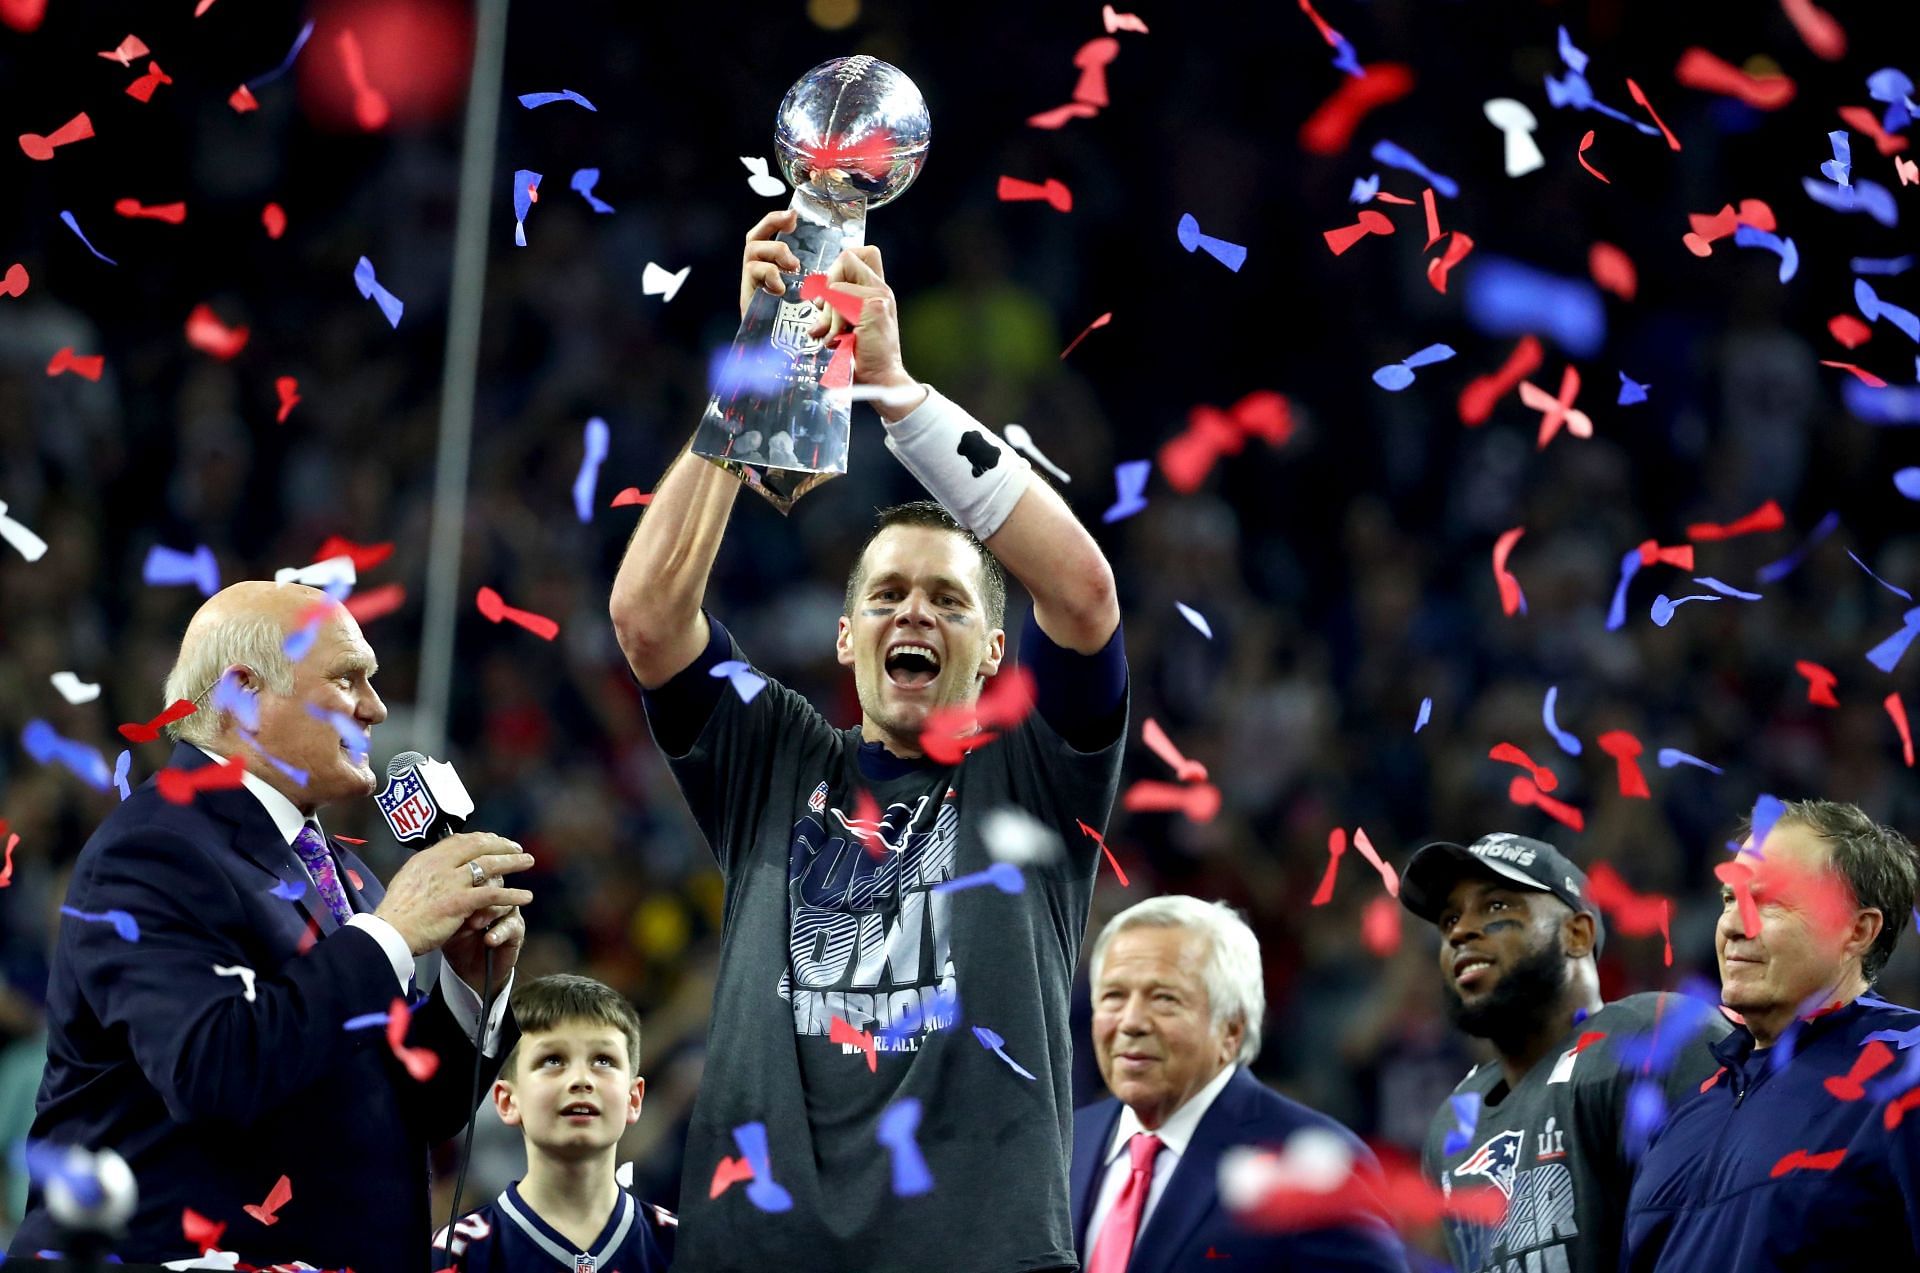 How much was the cost of the first Super Bowl ticket?